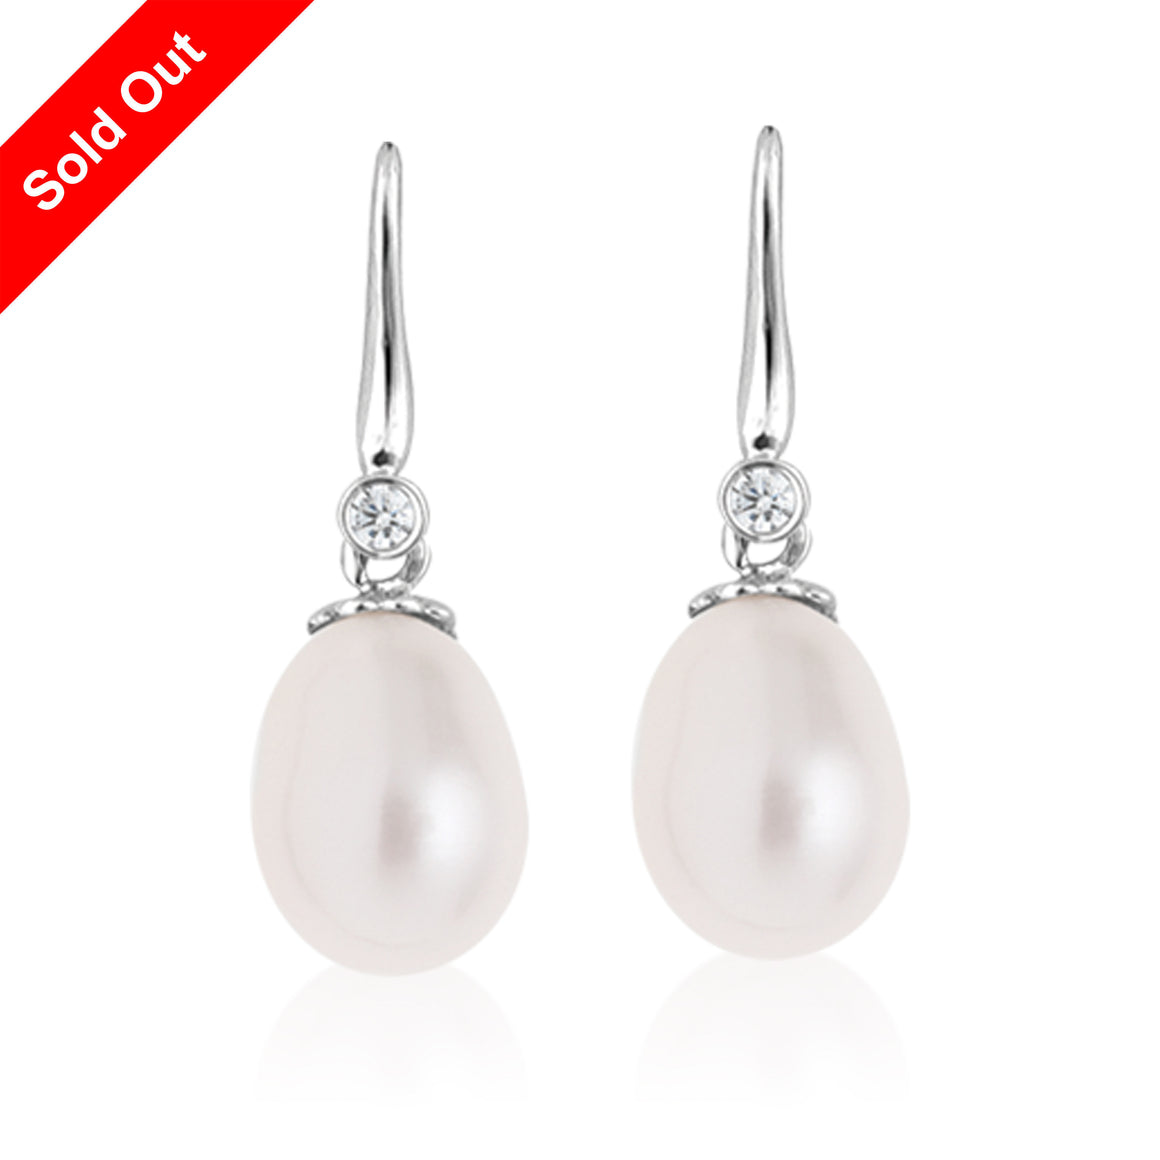 "South Pacific" 18K White Gold & Diamond Cultured Pearl Earring